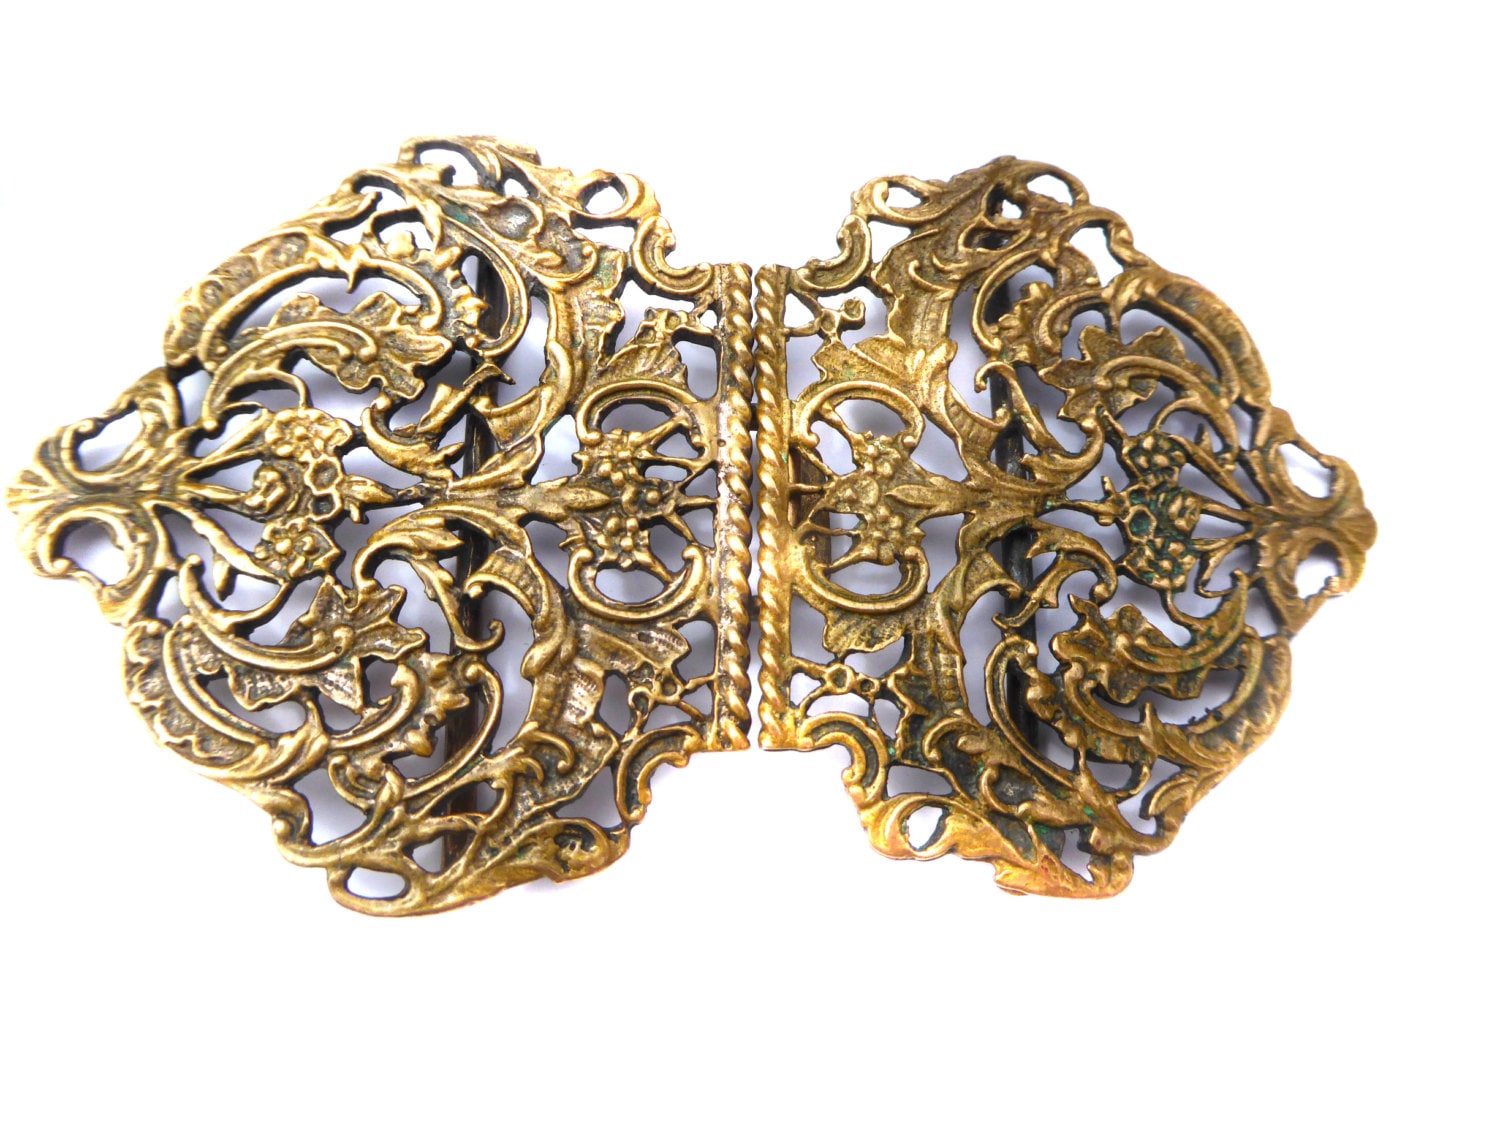 Vintage Gilt Metal Belt Buckle Made in England by BiminiCricket